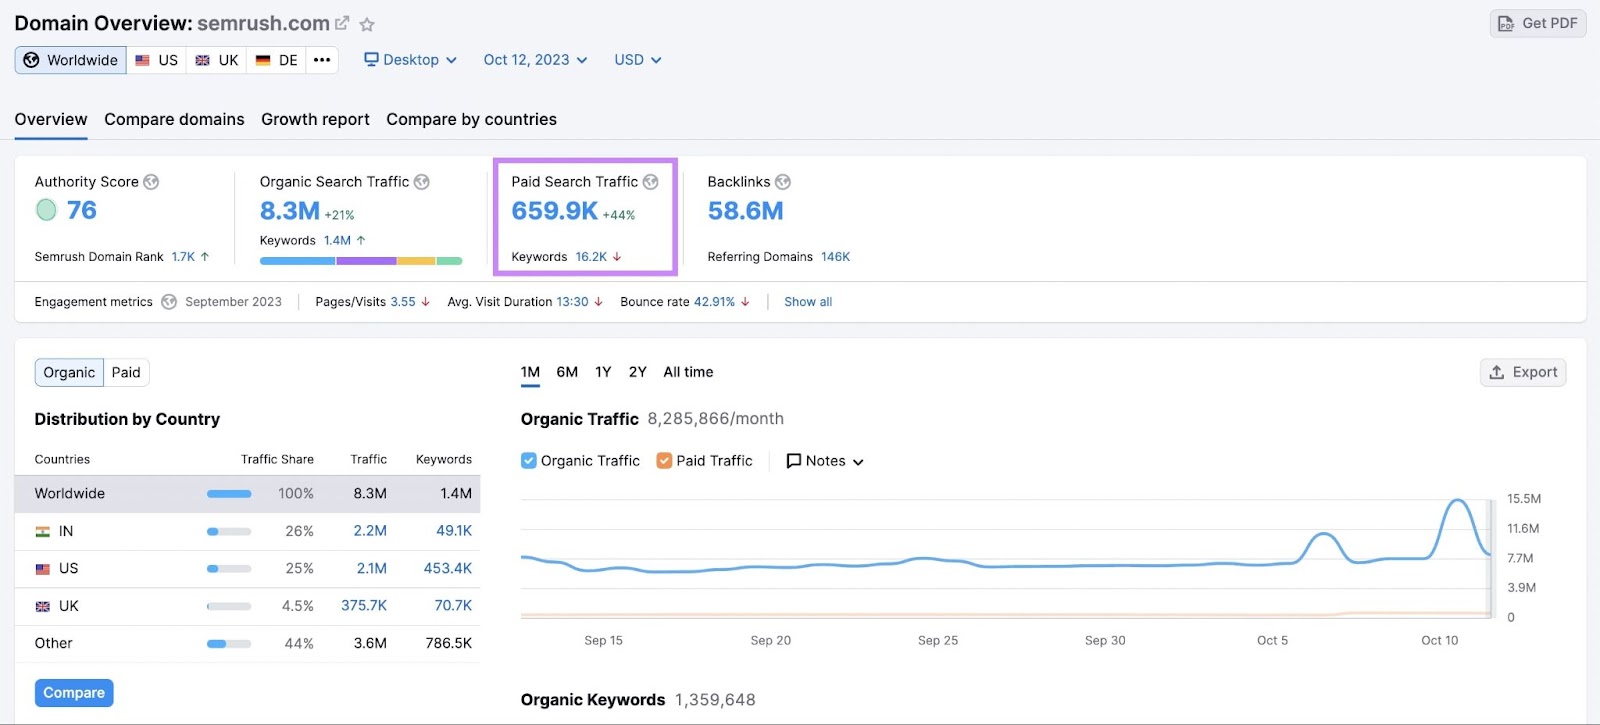 Paid search traffic metric shows 659k users for "semrush.com" in Domain Overview tool